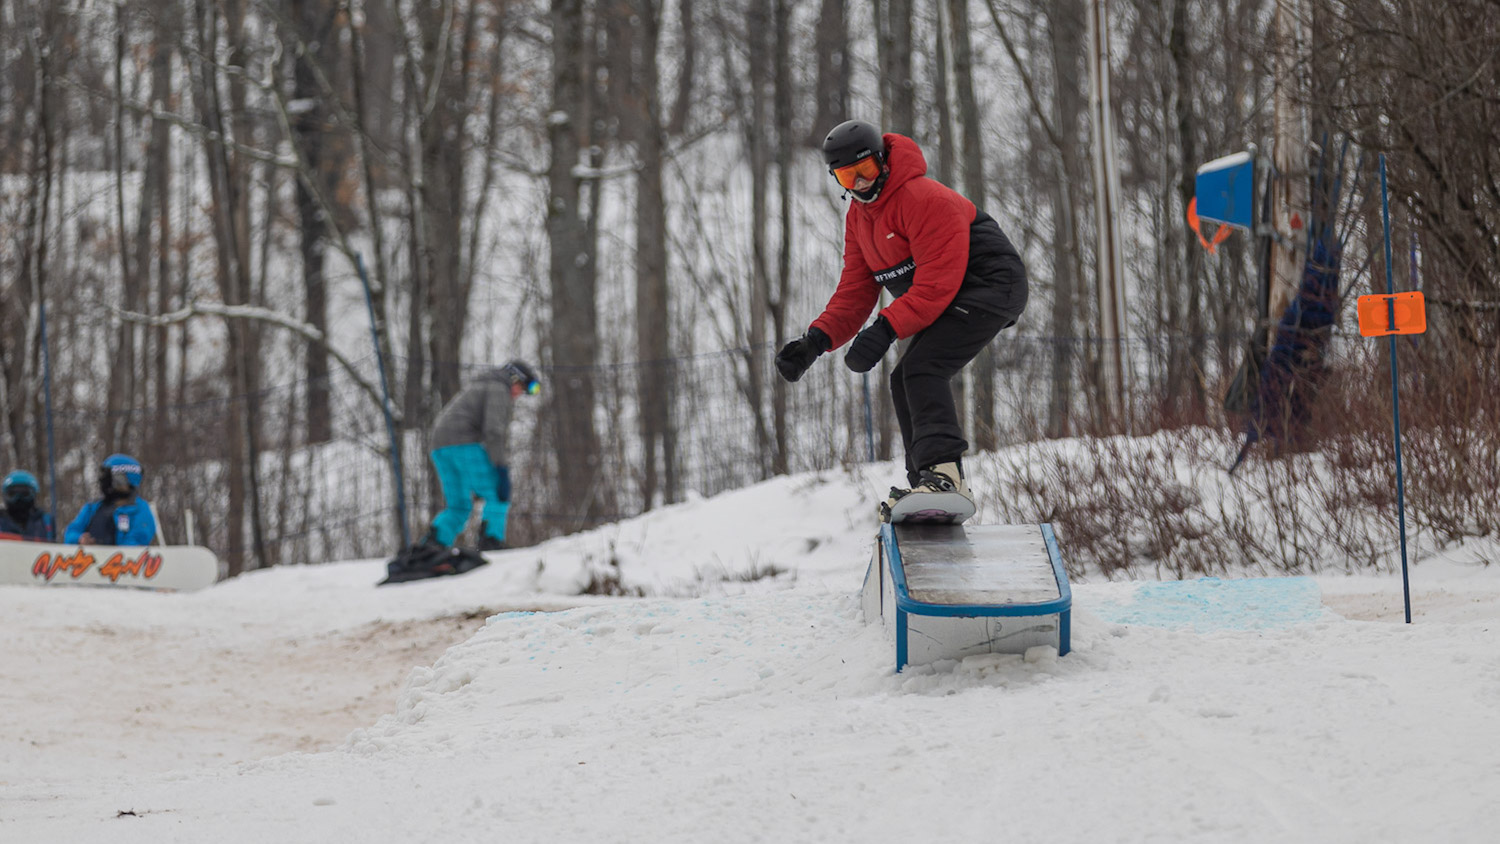 Snowboarder going down rail while Learning to snowboard in the park at Blue Mountain